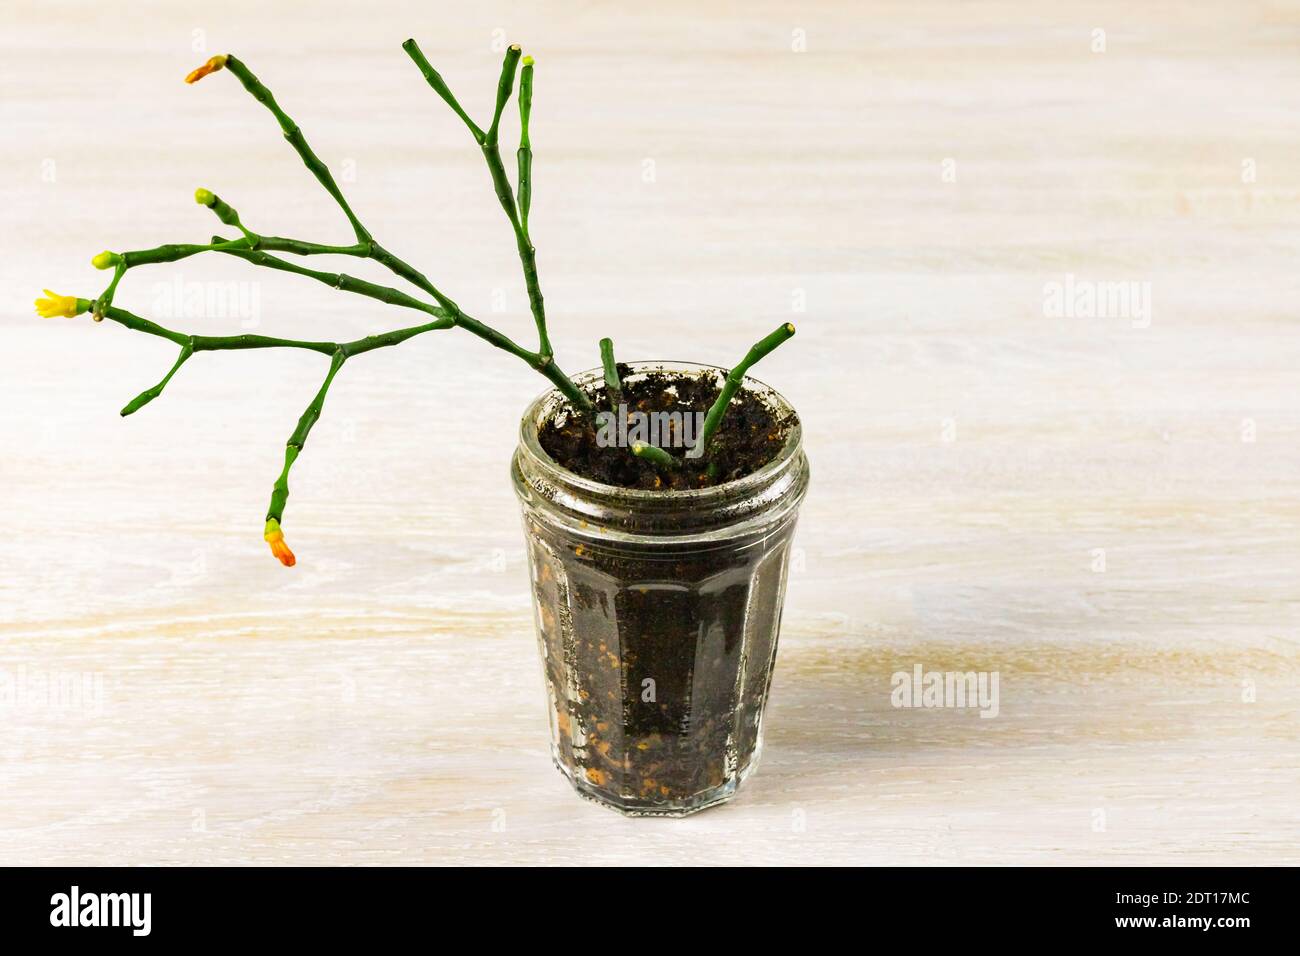 Hatiora salicornioideshouse decorative home house plant seedling sprout in glass soil flowerpot Stock Photo